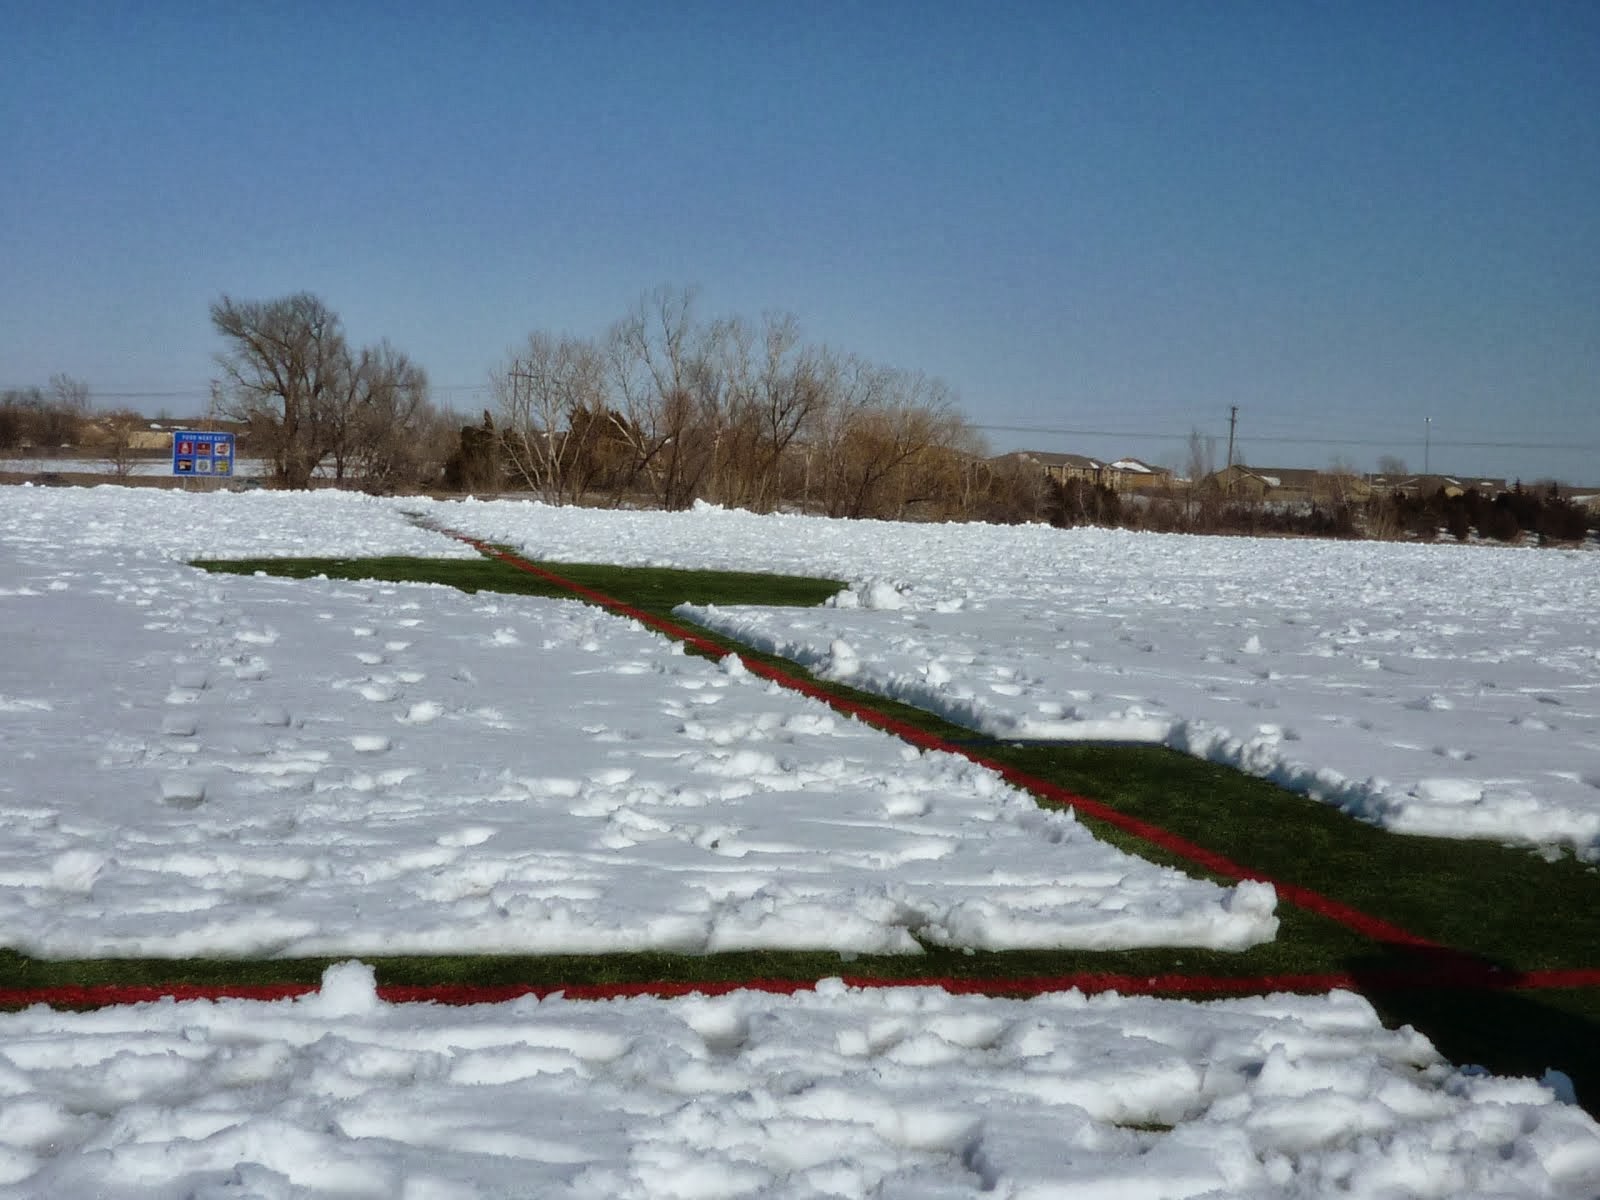 They had to shovel the snow to see the lines on the field.